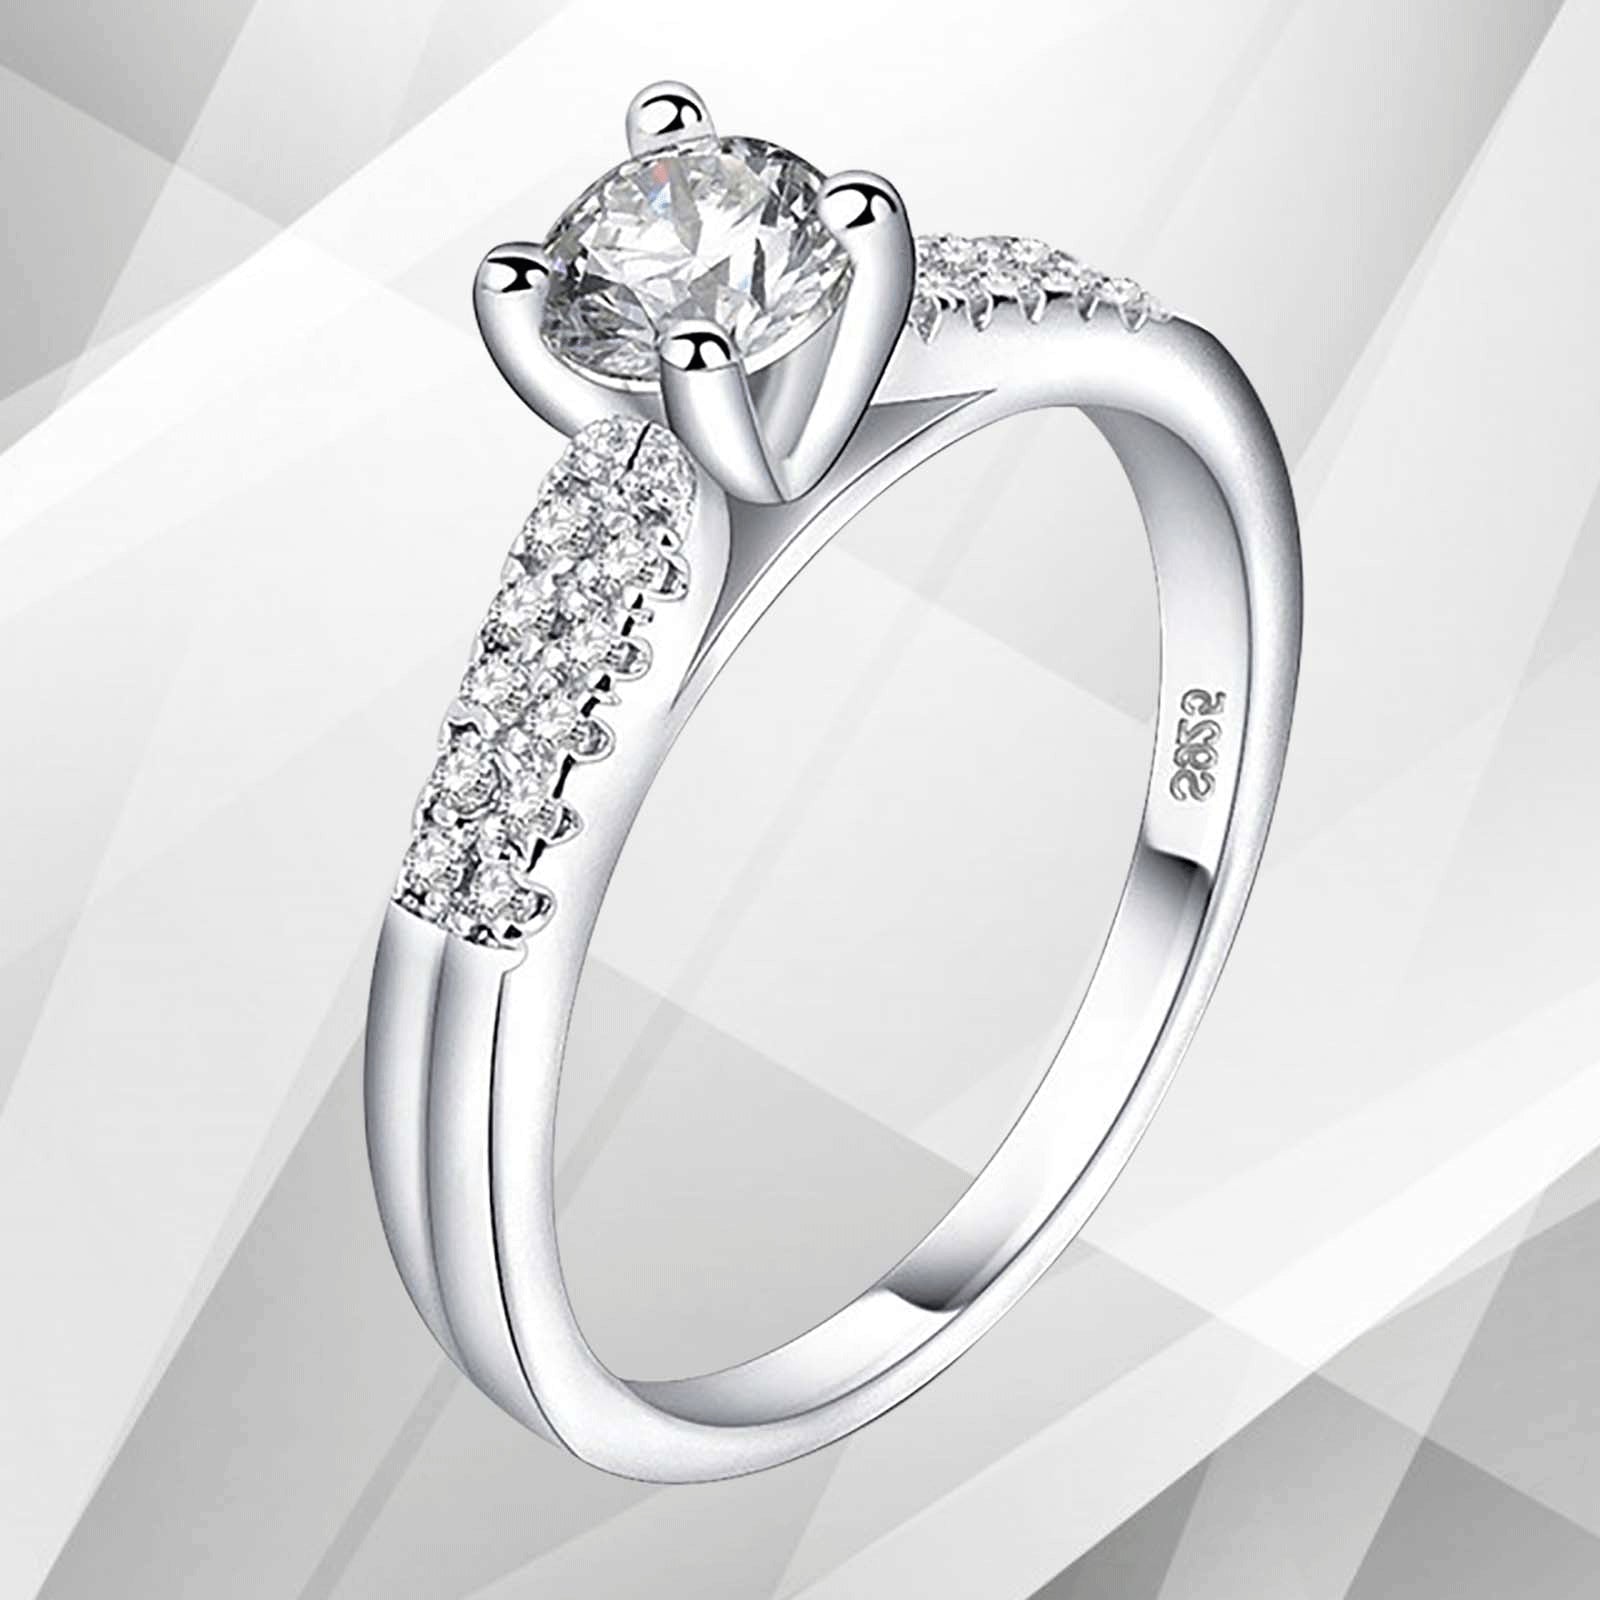 Nature-Inspired Women's Engagement Ring | 2.00Ct CZ Diamond | Prong & Channel Settings | Hypoallergenic | Free Shipping - Jewelry & Watches - Bijou Her -  -  - 